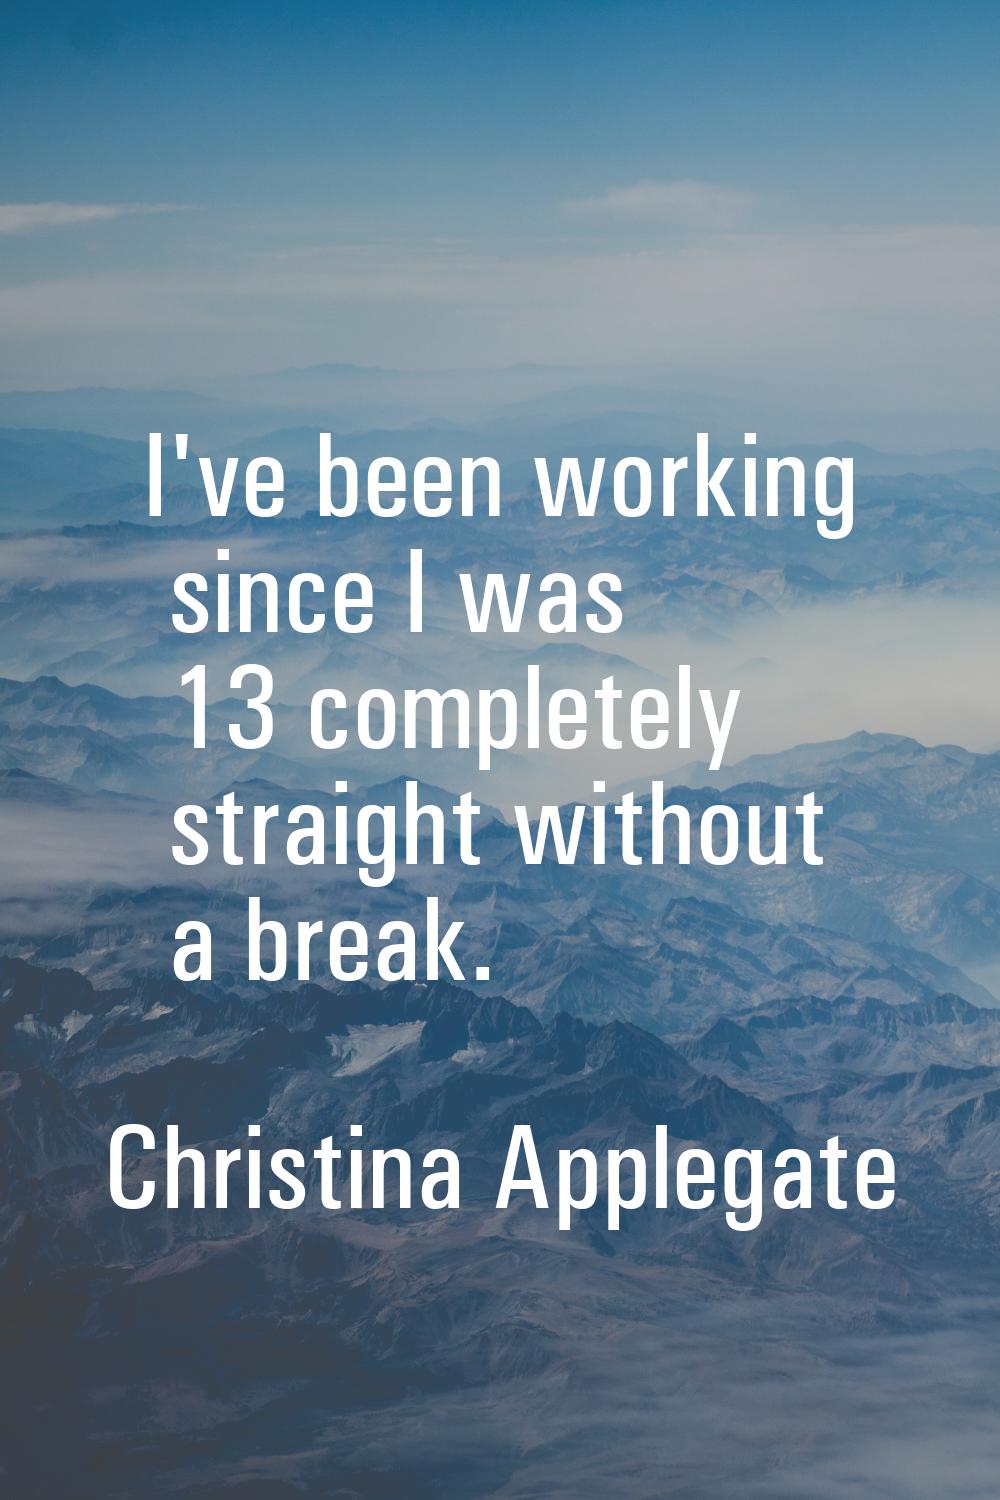 I've been working since I was 13 completely straight without a break.